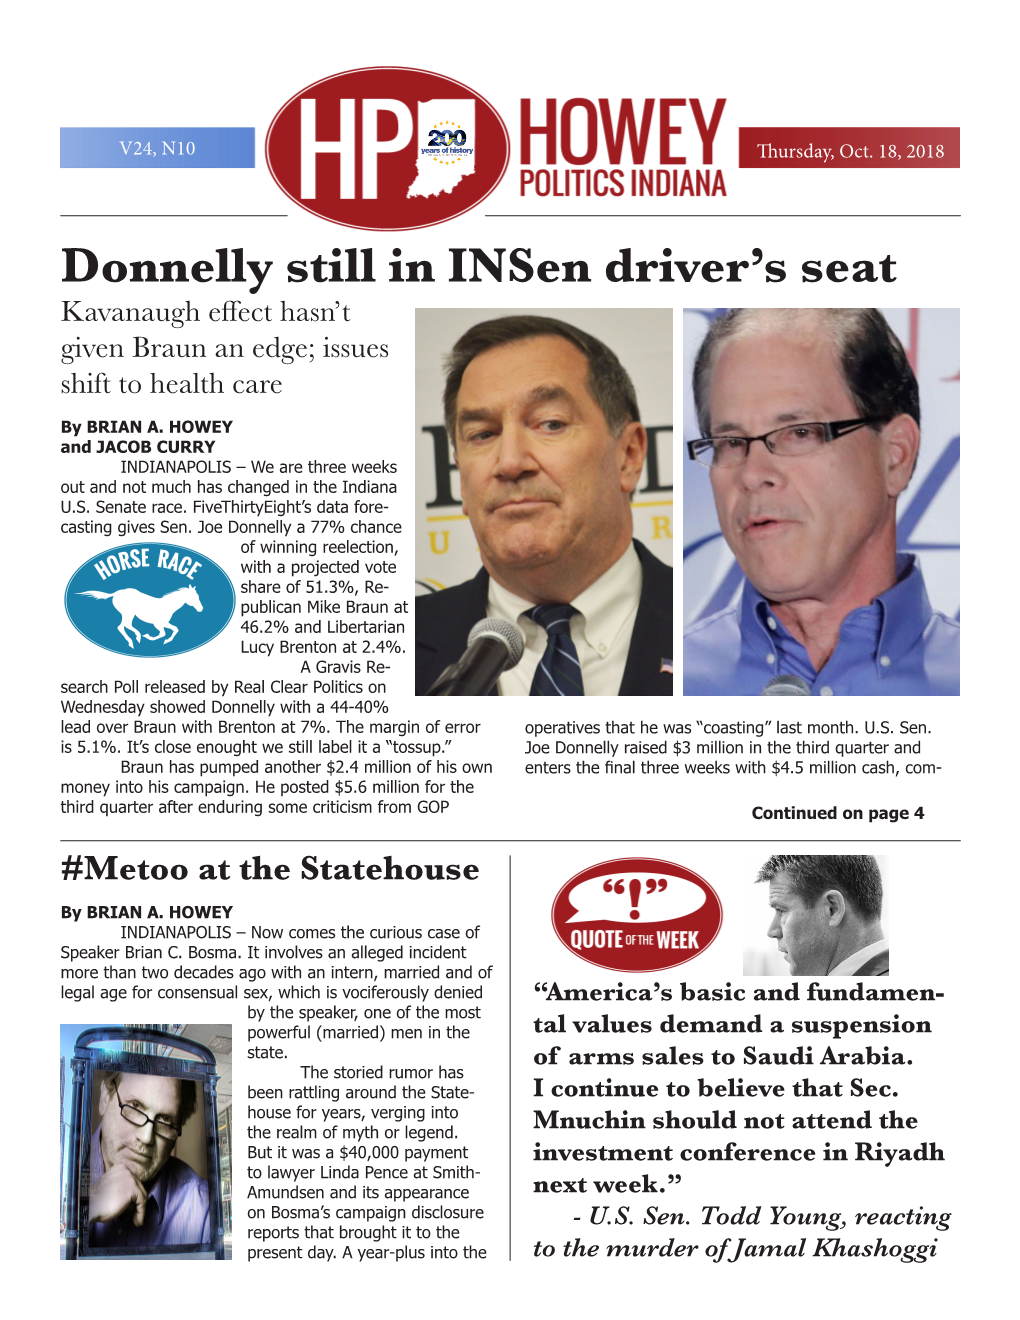 Donnelly Still in Insen Driver's Seat